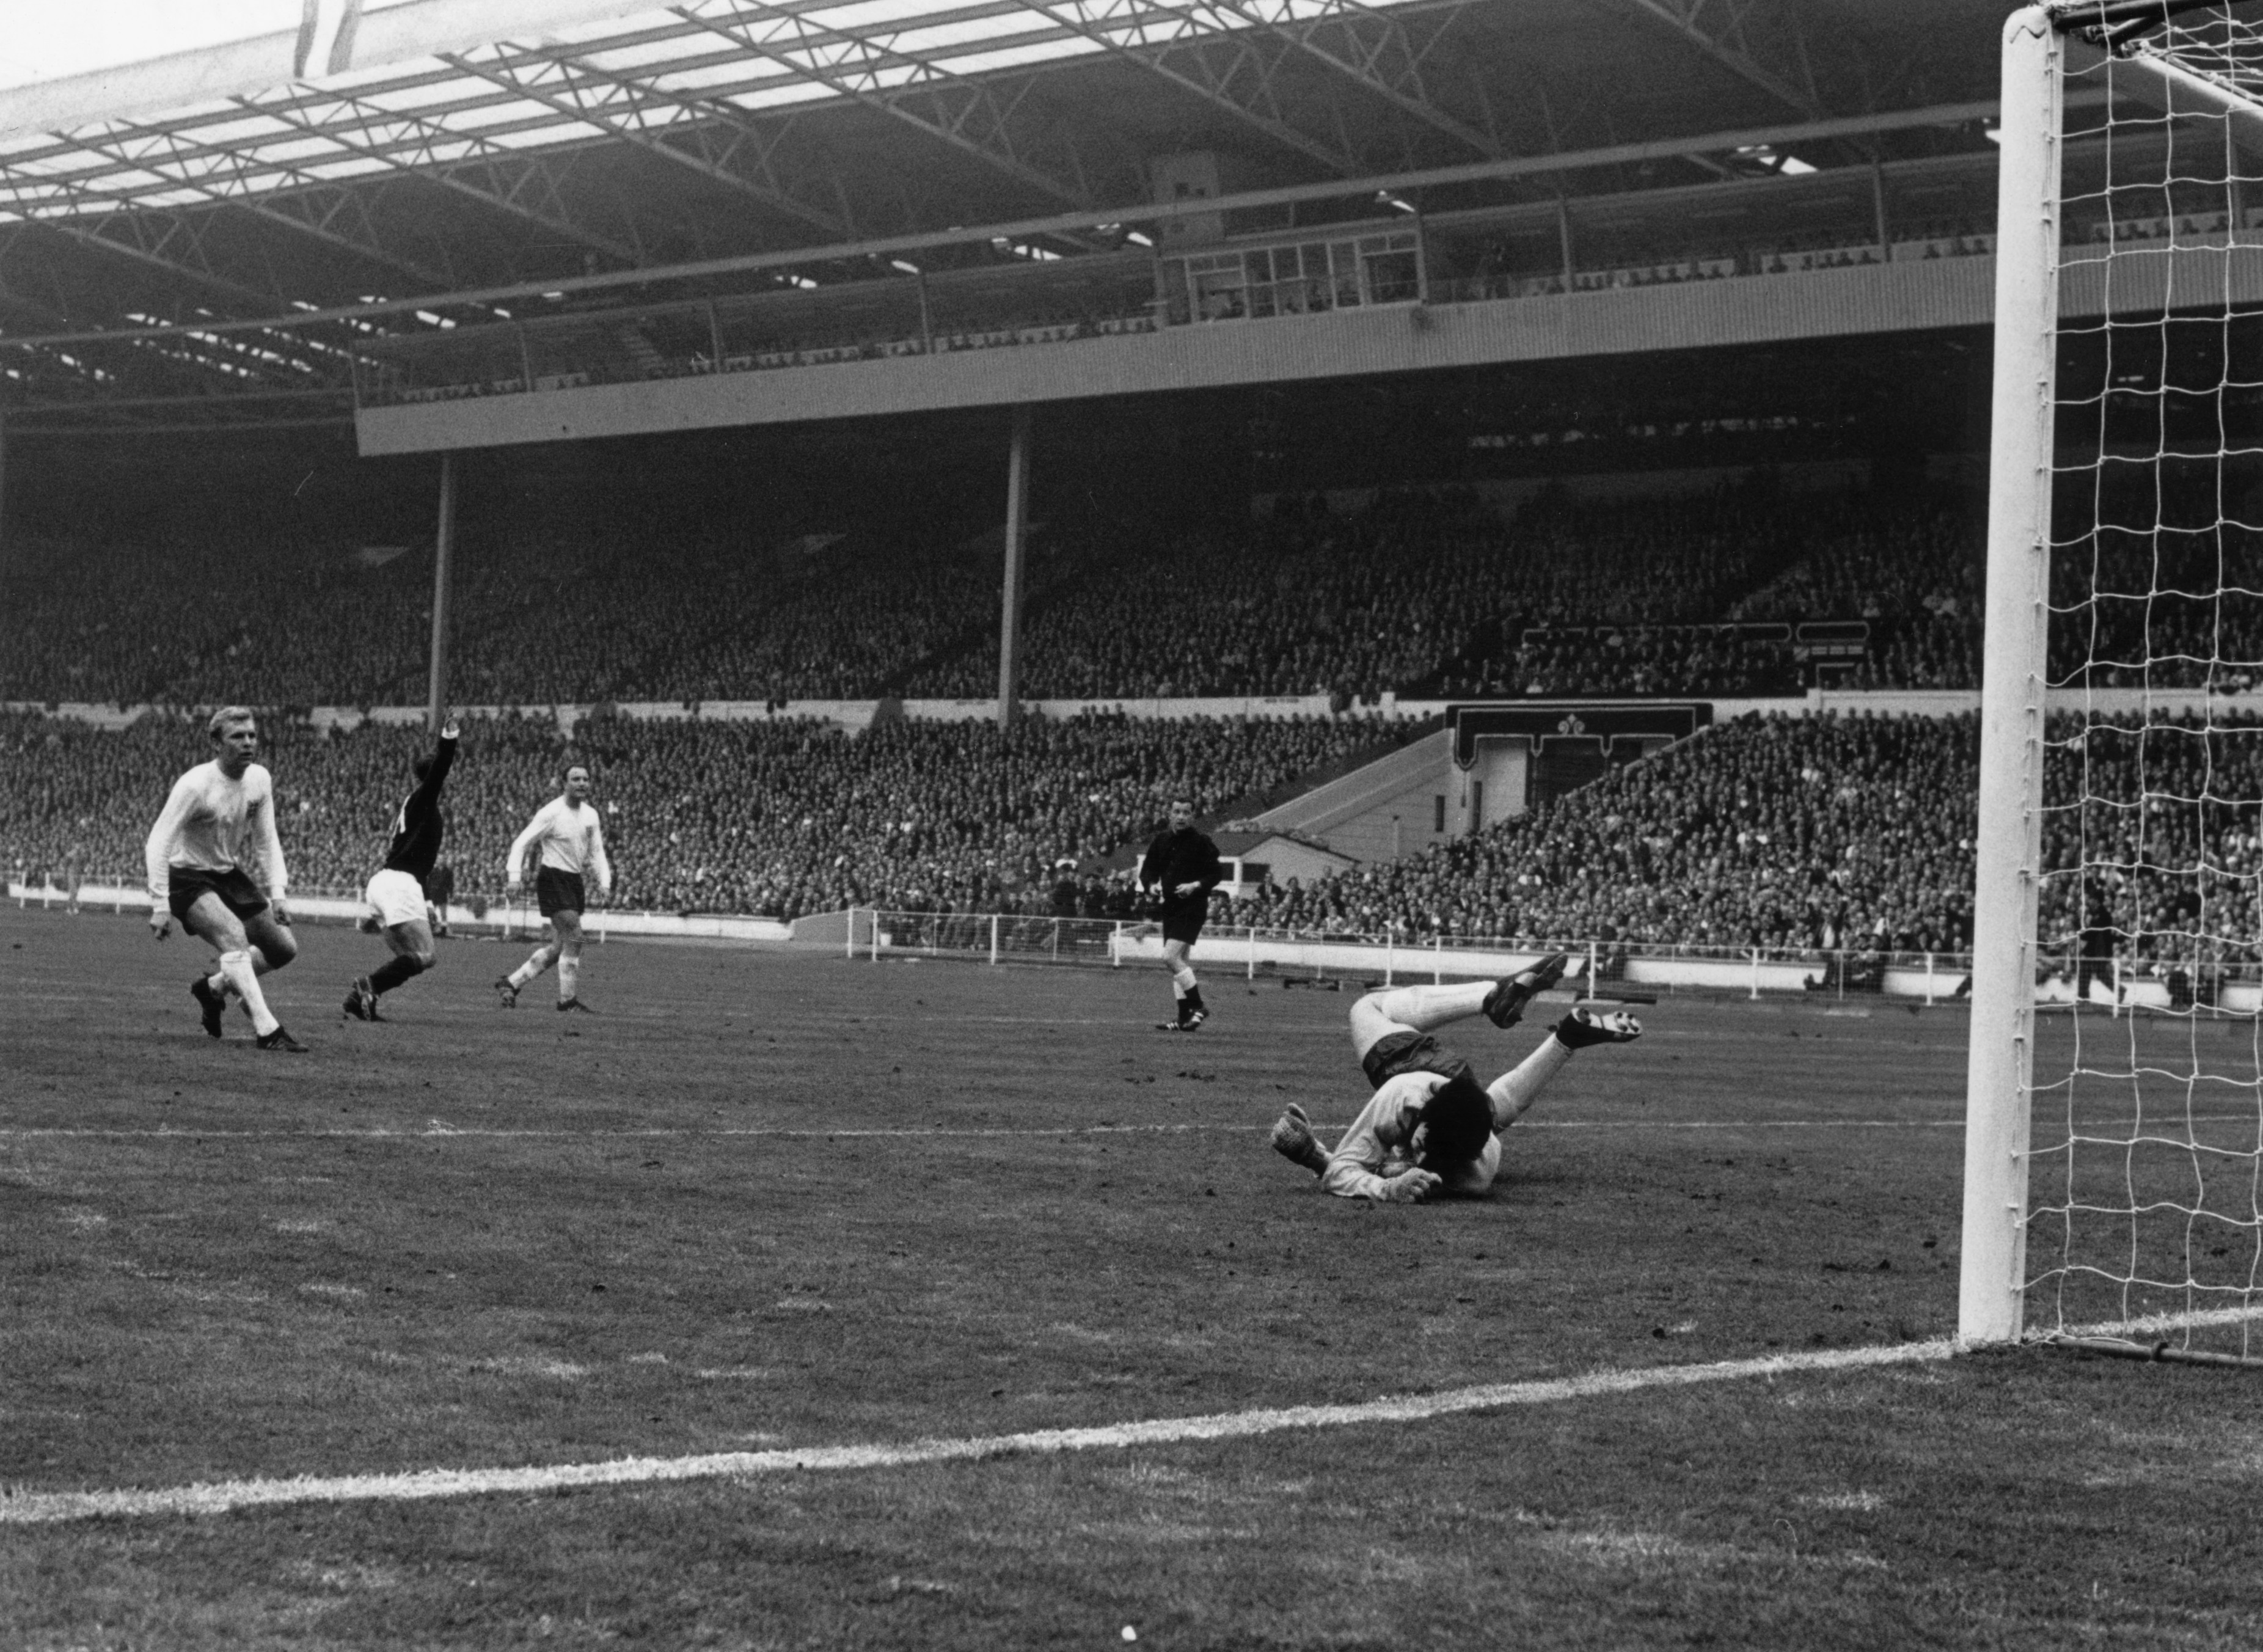 Bobby Lennox turns to celebrate his goal at Wembley in 1967.